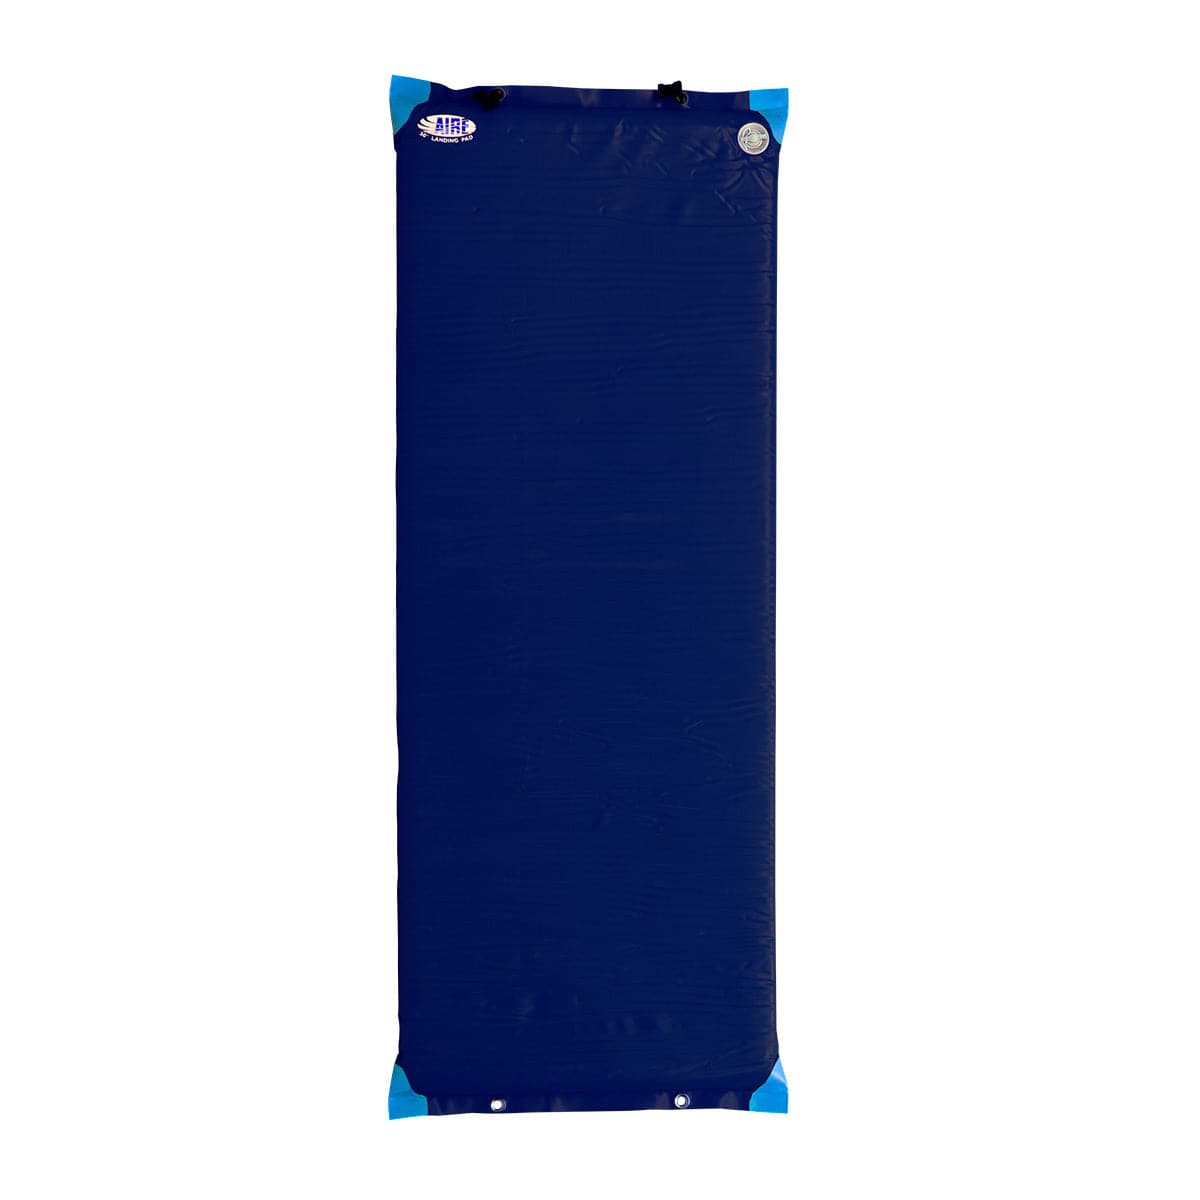 Featuring the Landing Pad Sleeping Pads paco pad, sleep pad manufactured by AIRE shown here from a ninth angle.